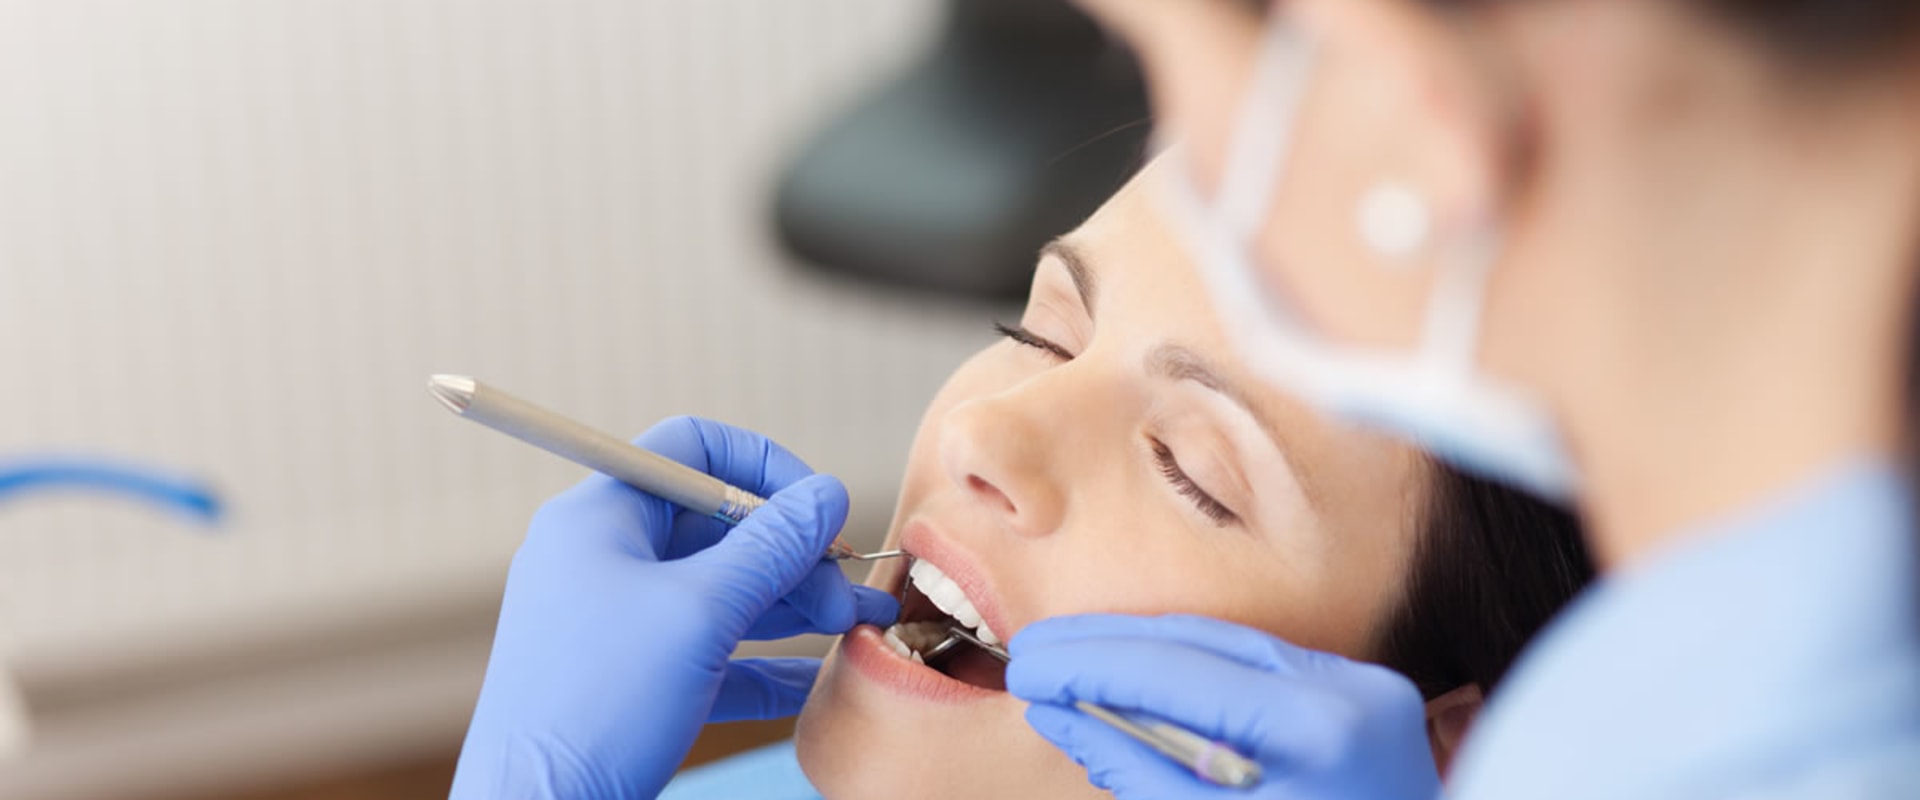 Sedation Dentistry: A Safe Option for Patients with Certain Medical Conditions